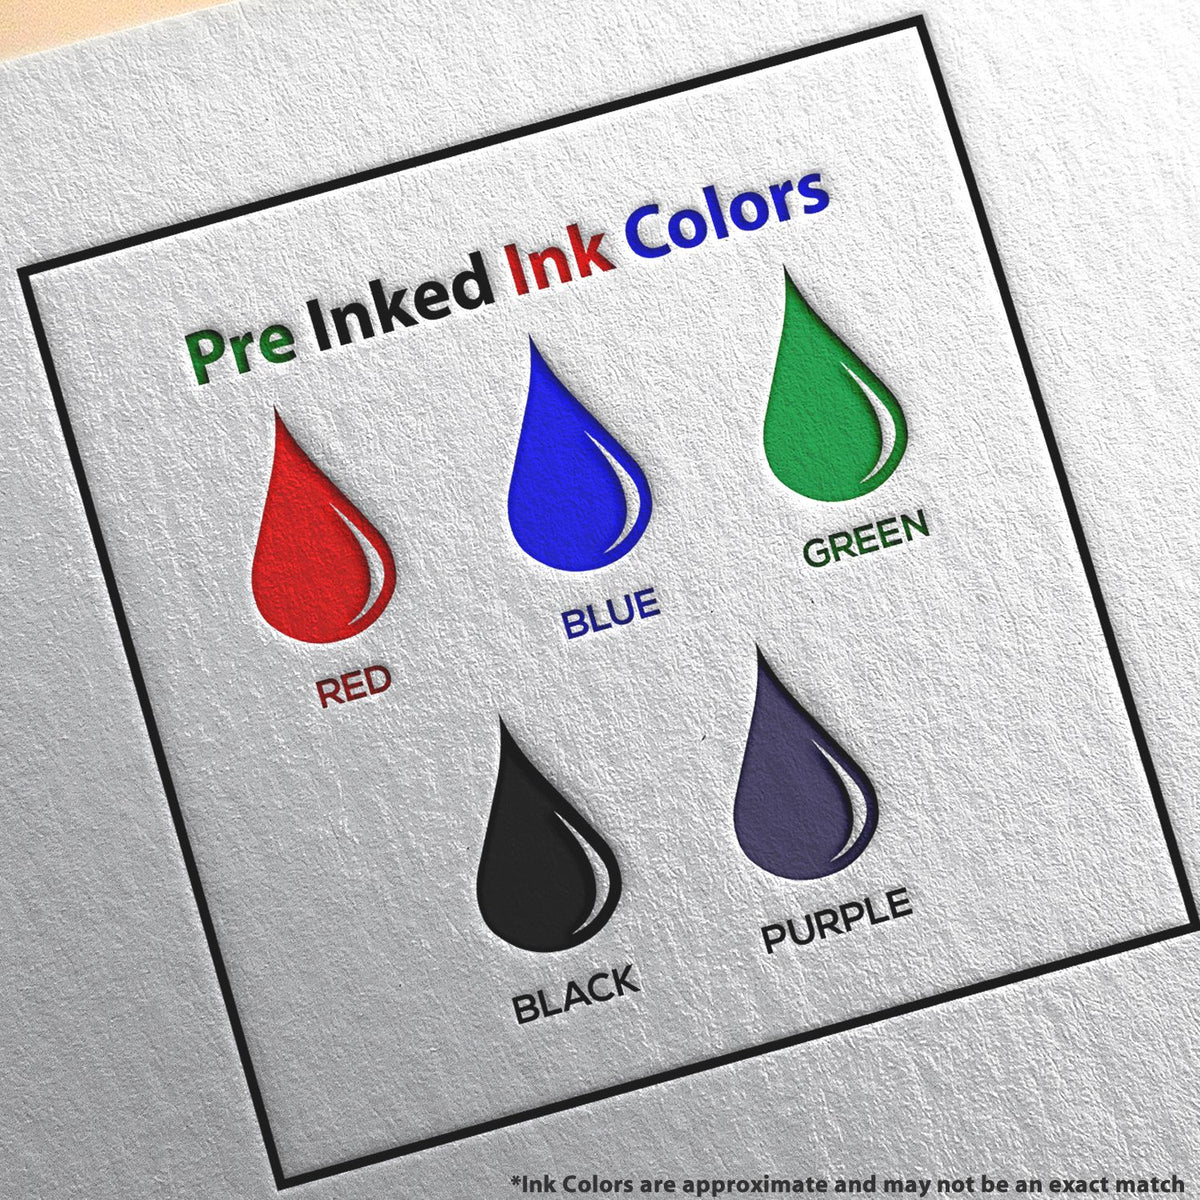 A picture showing the different ink colors or hues available for the Premium MaxLight Pre-Inked Maryland Engineering Stamp product.